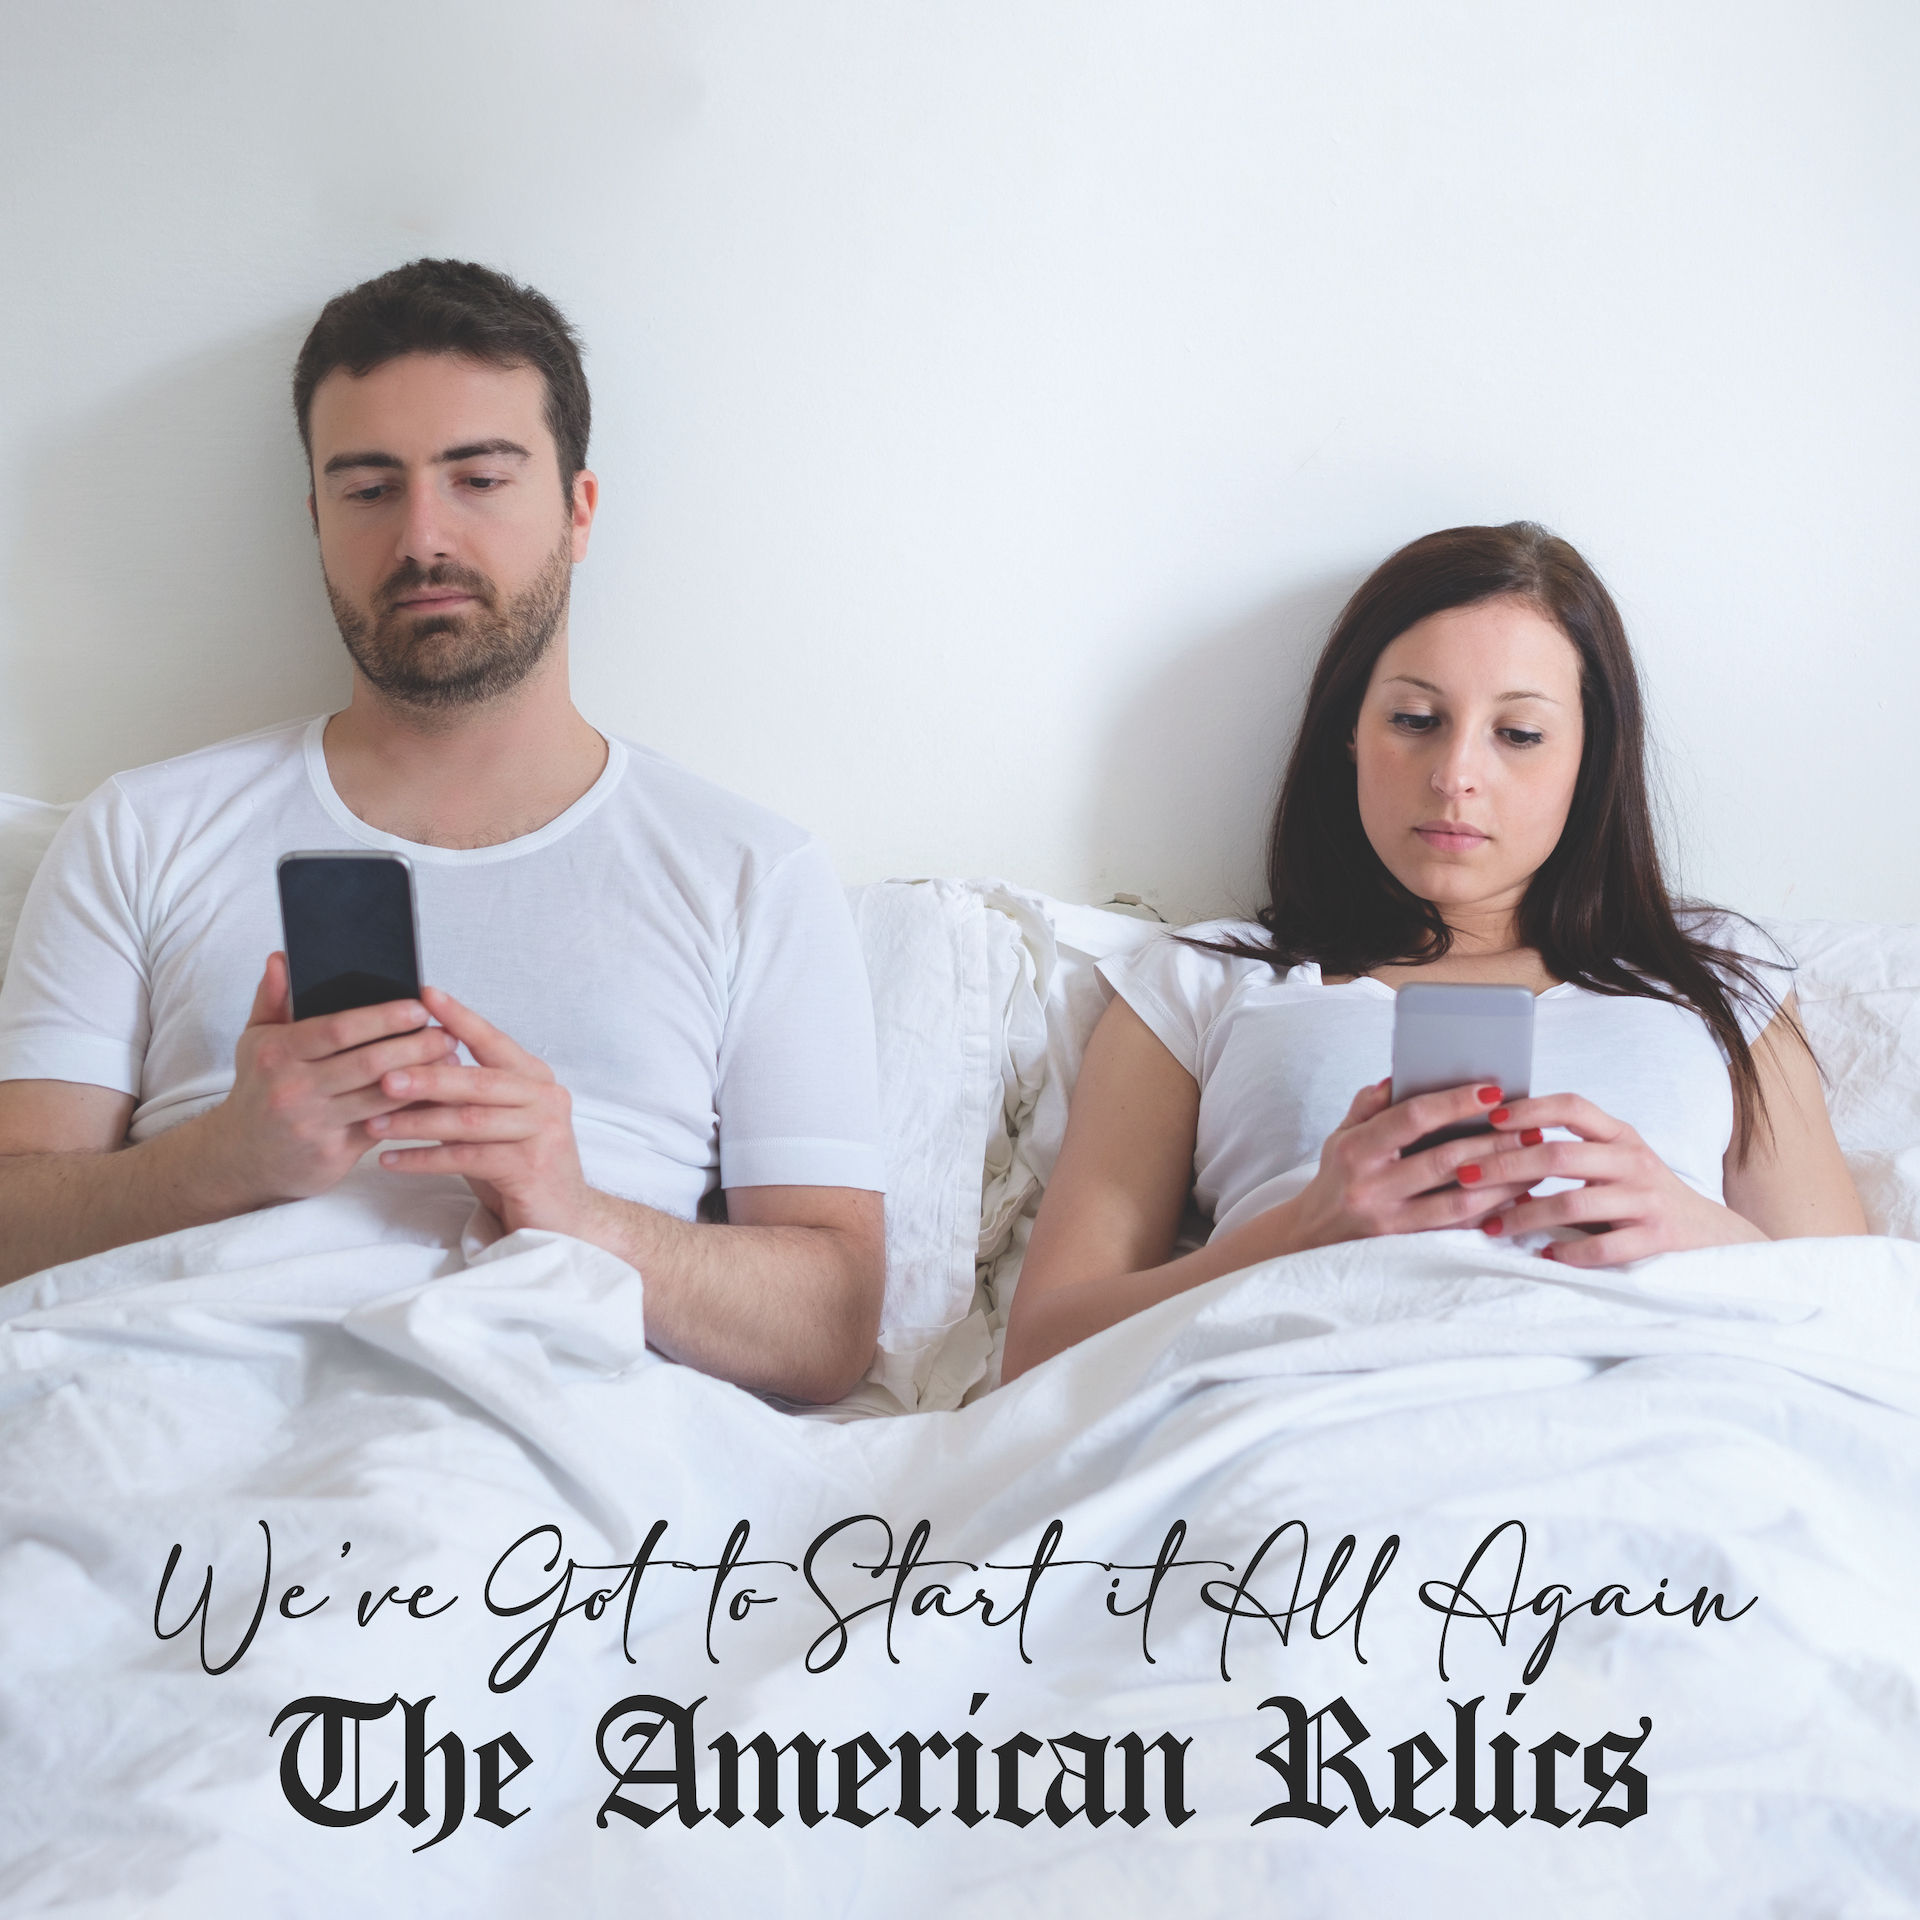 THE AMERICAN RELICS Release New Single “We’ve Got To Start It All Again” Now Available Worldwide